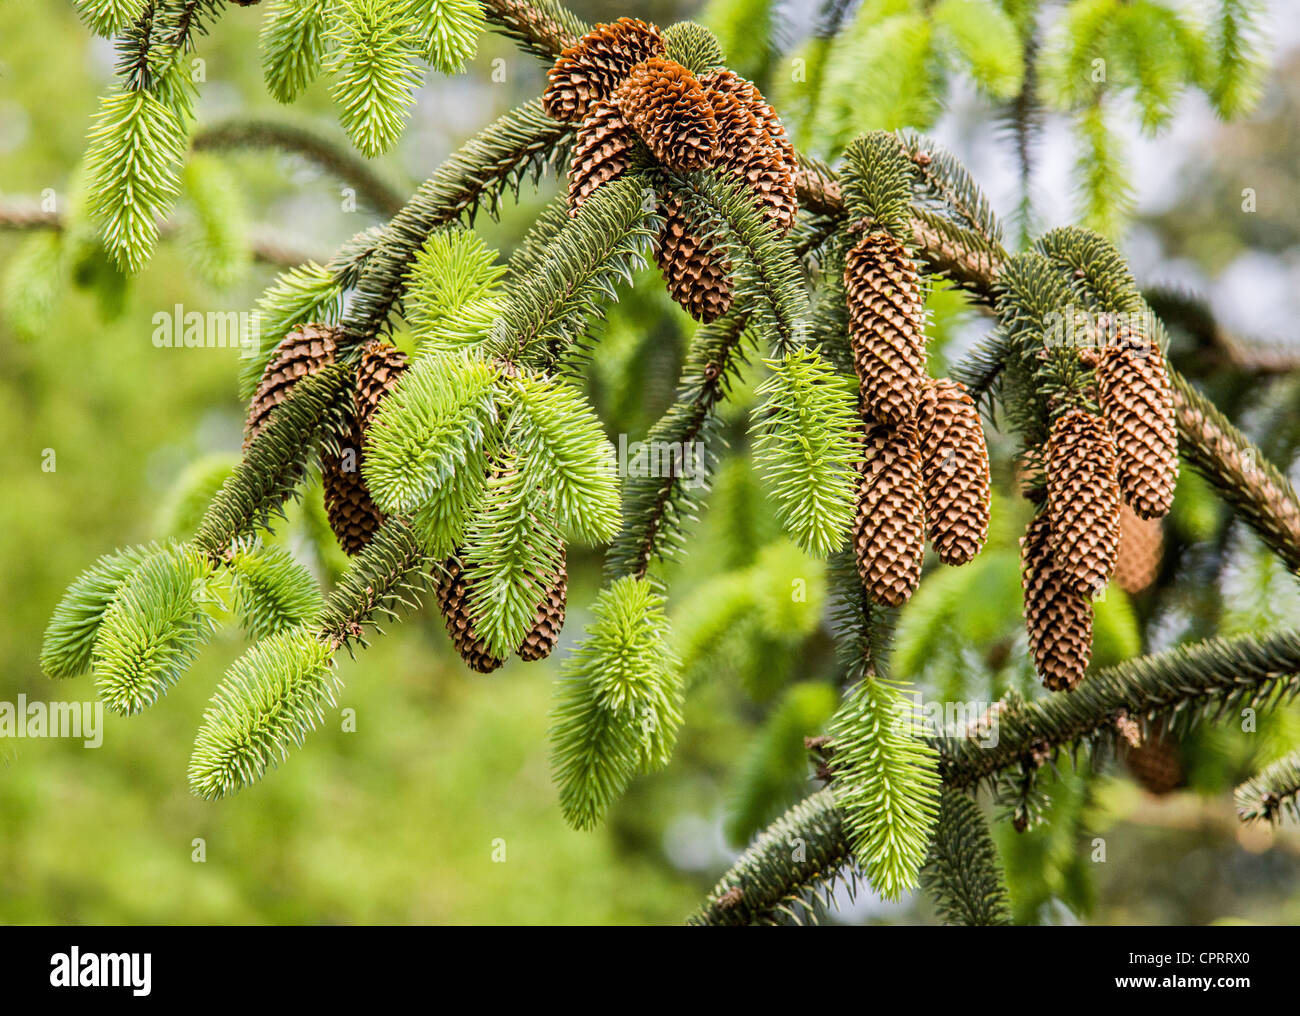 Abies Fir cones along with newly emerged green leaves in a Welsh forest Stock Photo